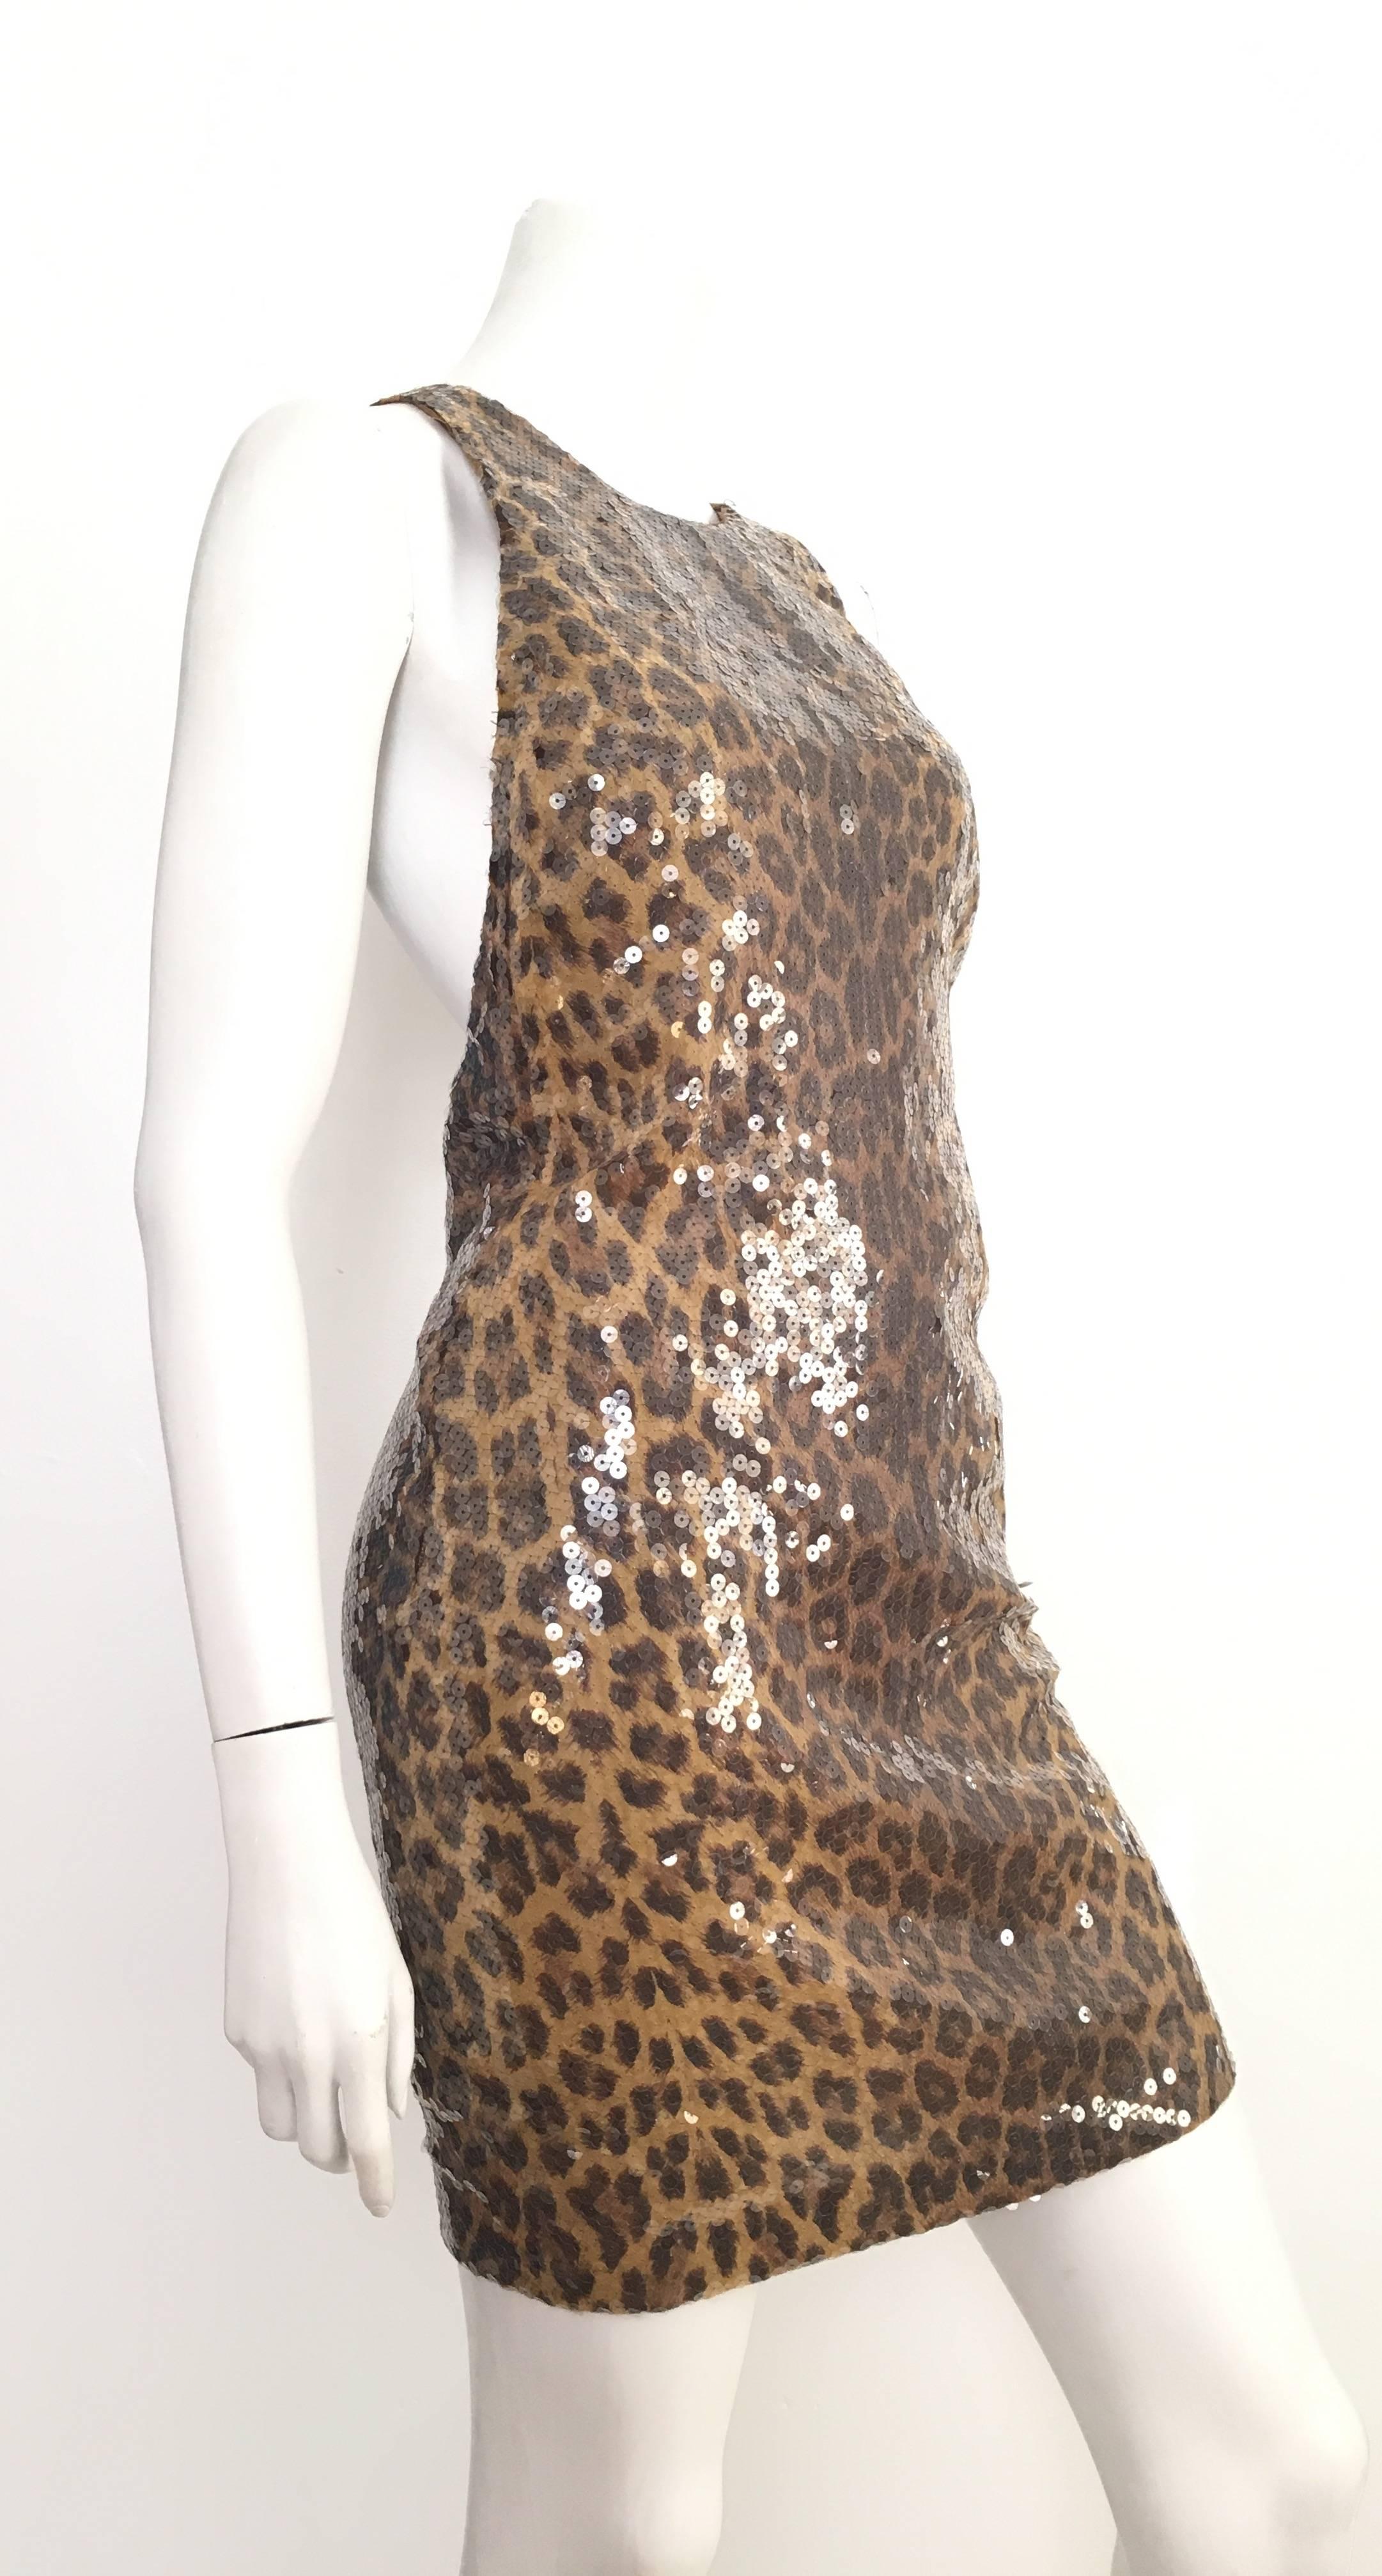 Vera Wang 1980s sequin cheetah print crisscross sexy cocktail dress is an USA size 6.  Ladies please grab your trusted tape measure so you can properly measure your bust, waist & hips to make certain this will fit your lovely body. From every angle